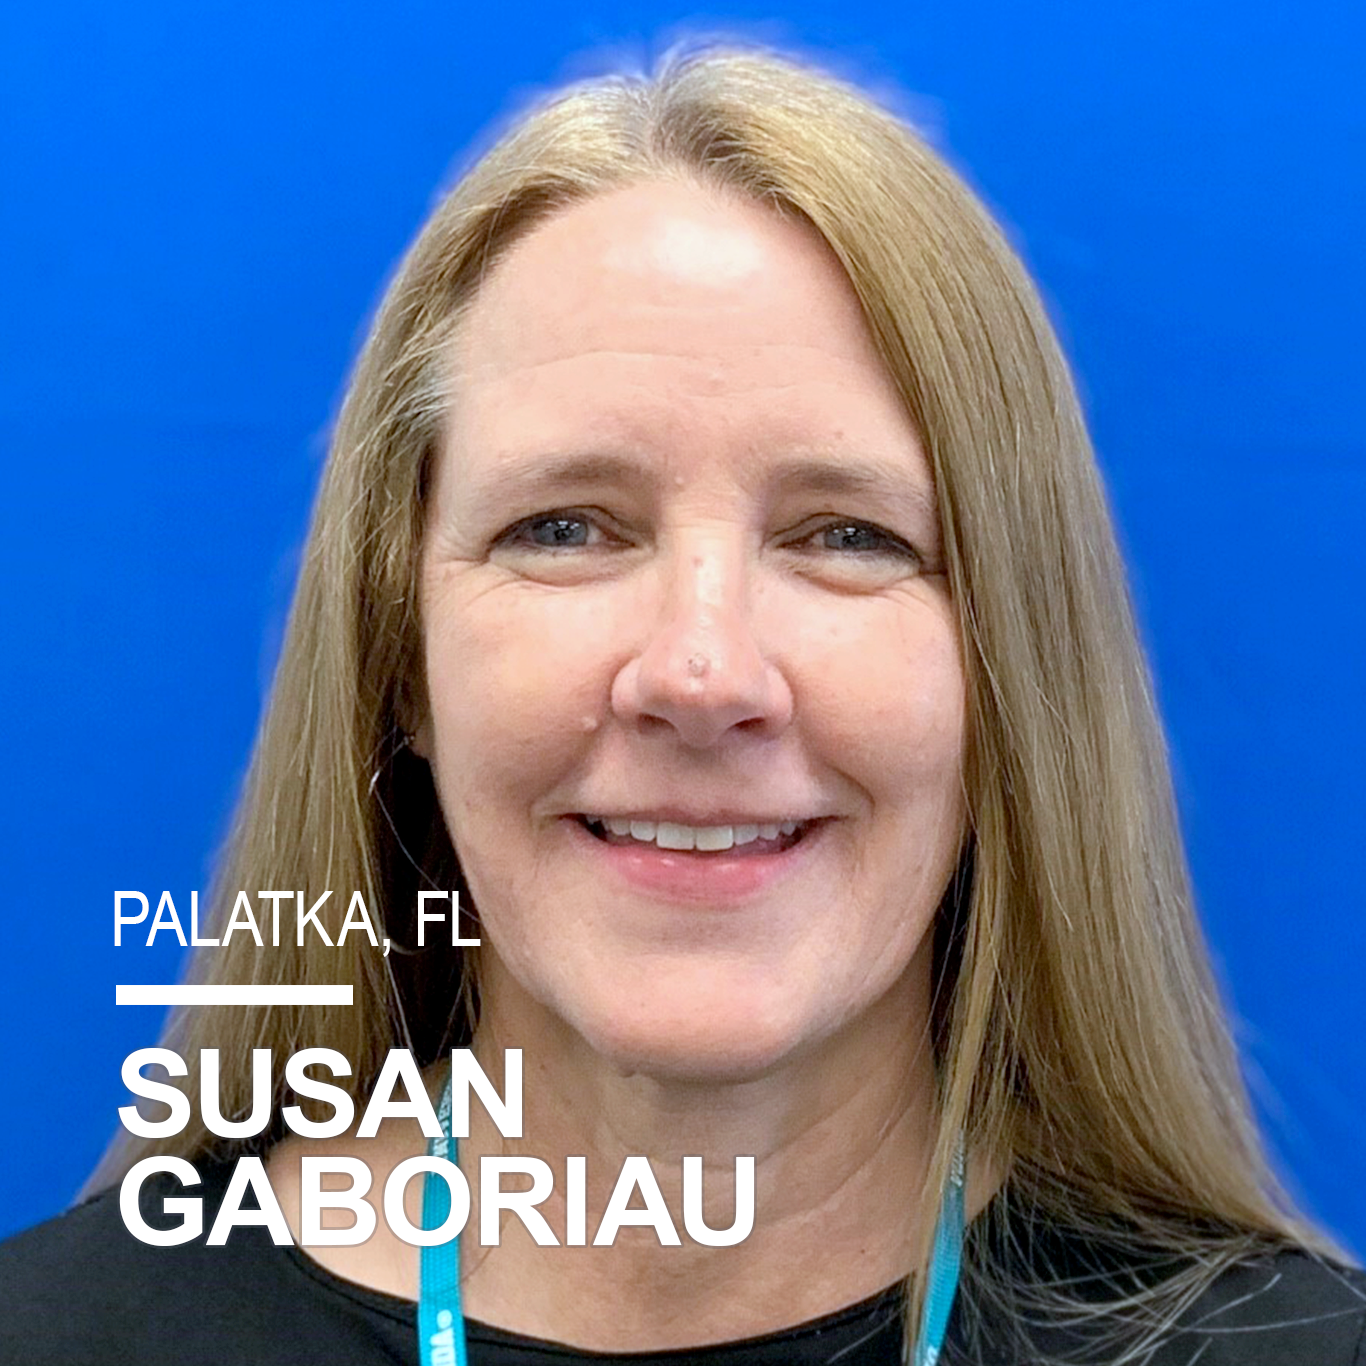 Susan Gaboriau is the district technology integration specialist for the Putnam County School District in Palatka, FL. She heads up all the robotics clubs and competitions in the district, to which MATE ROV and Battlebots will soon be added. Susan is passionate about STEAM, actively engaging students in hands-on experiences, and helping teachers properly integrate technology so that it enhances hands-on learning.